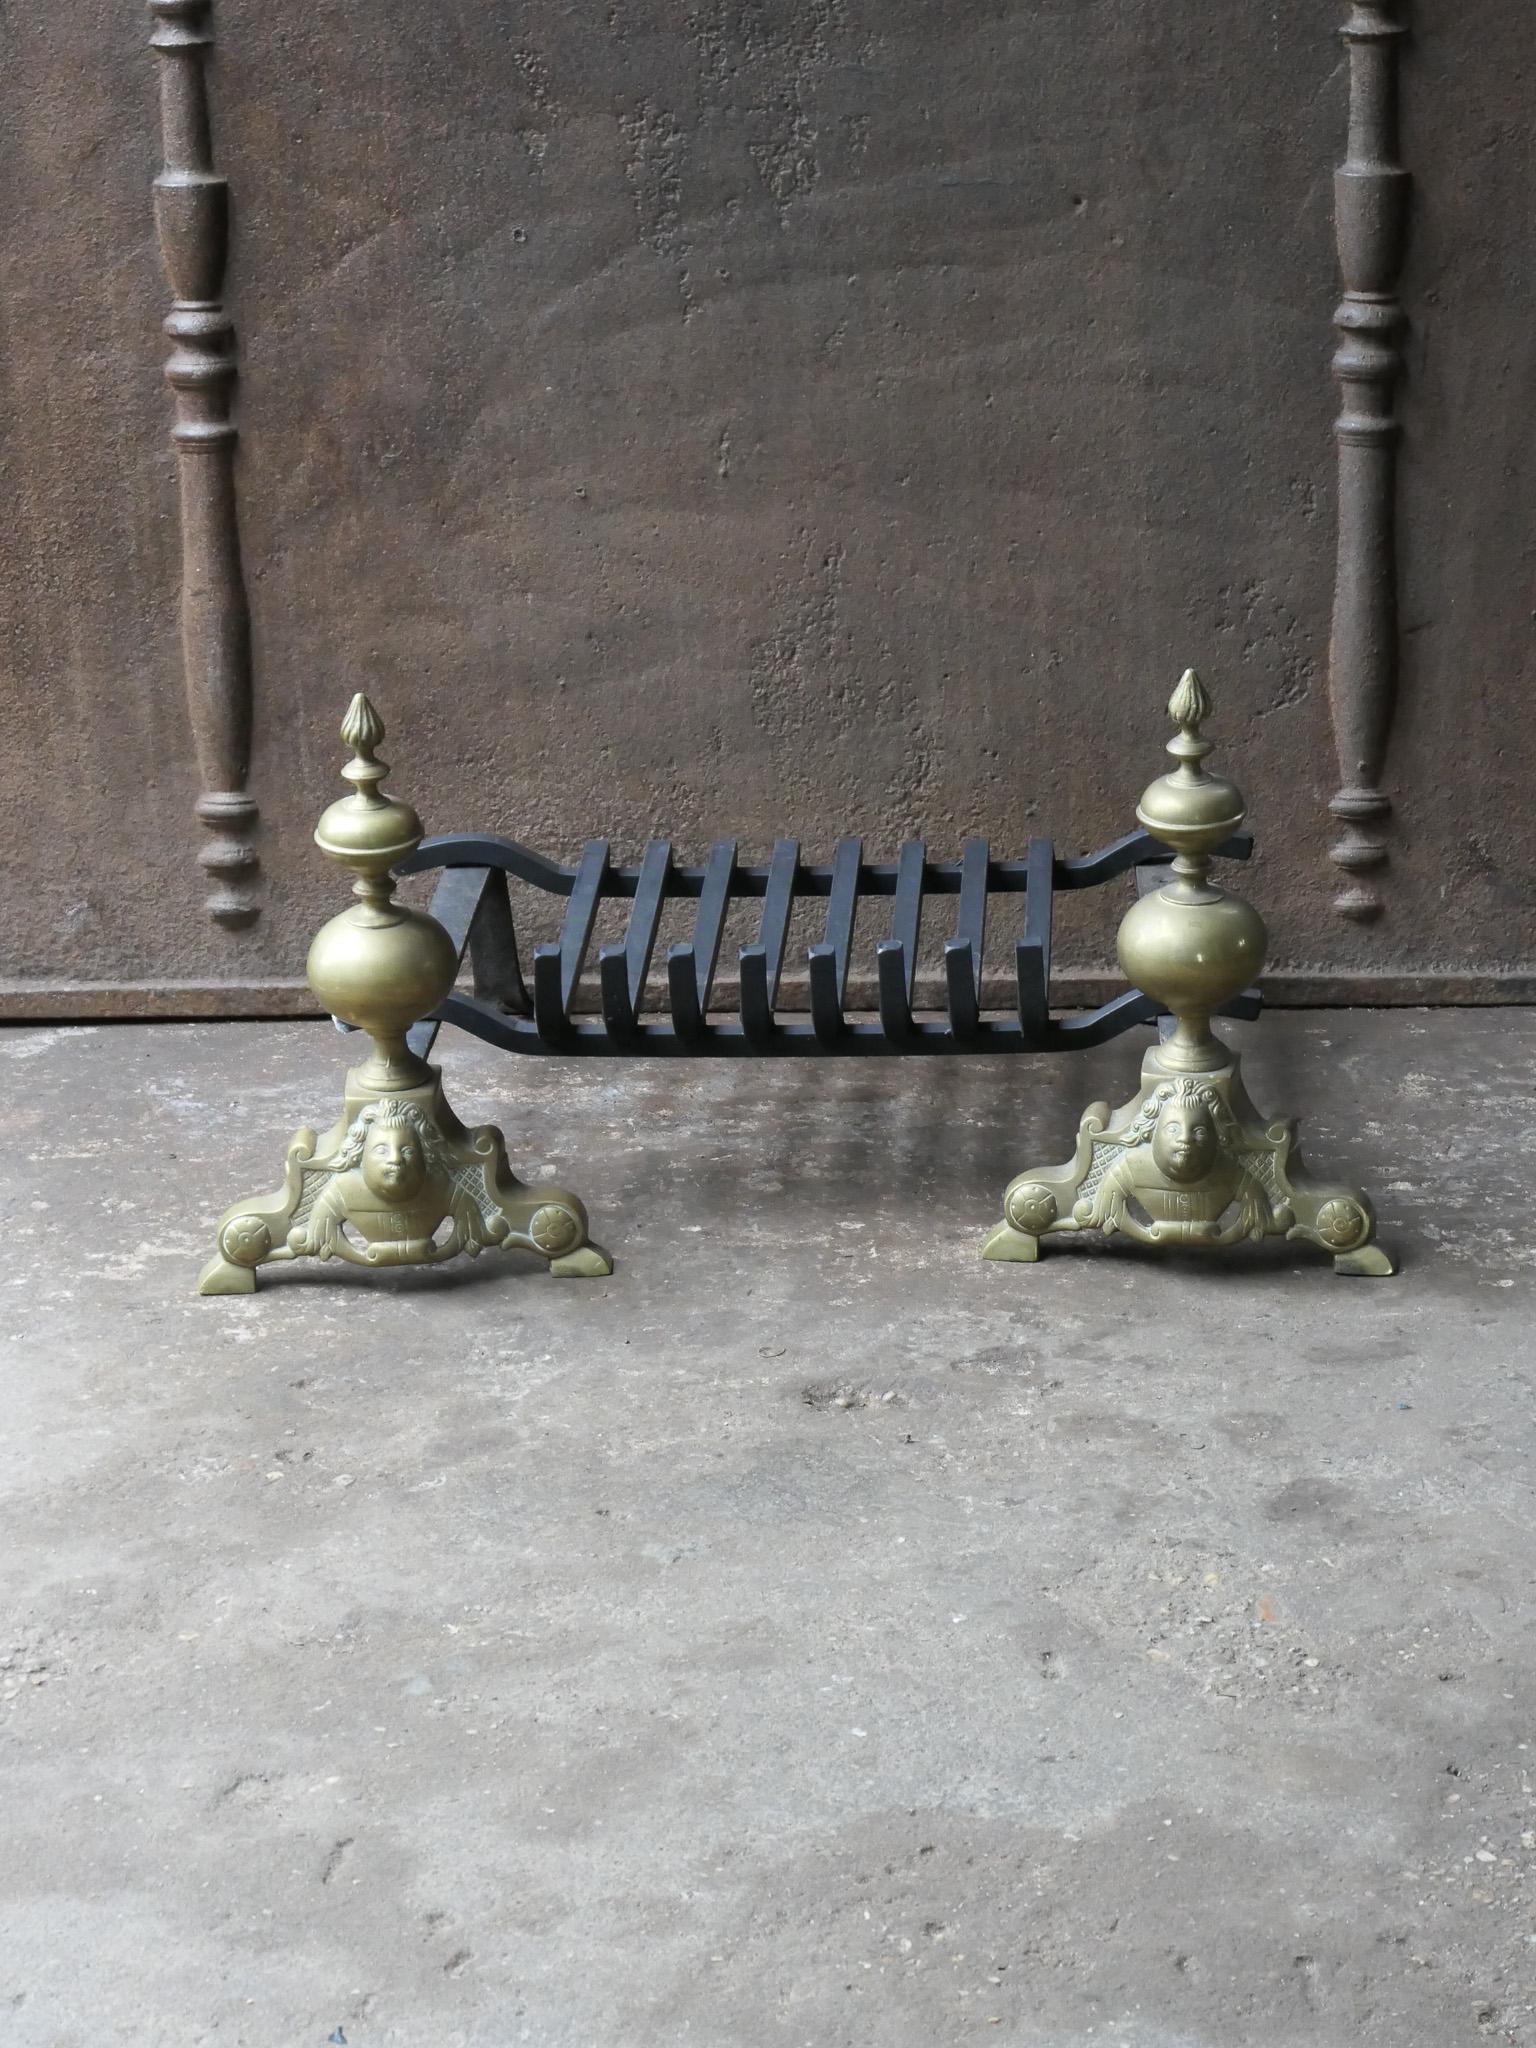 19th - 20th century French Louis XIV style fireplace basket - fire basket made of brass and wrought iron. The total width of the front is 27.8 inch (70.5 cm)

The basket is in a good condition and is fully functional.